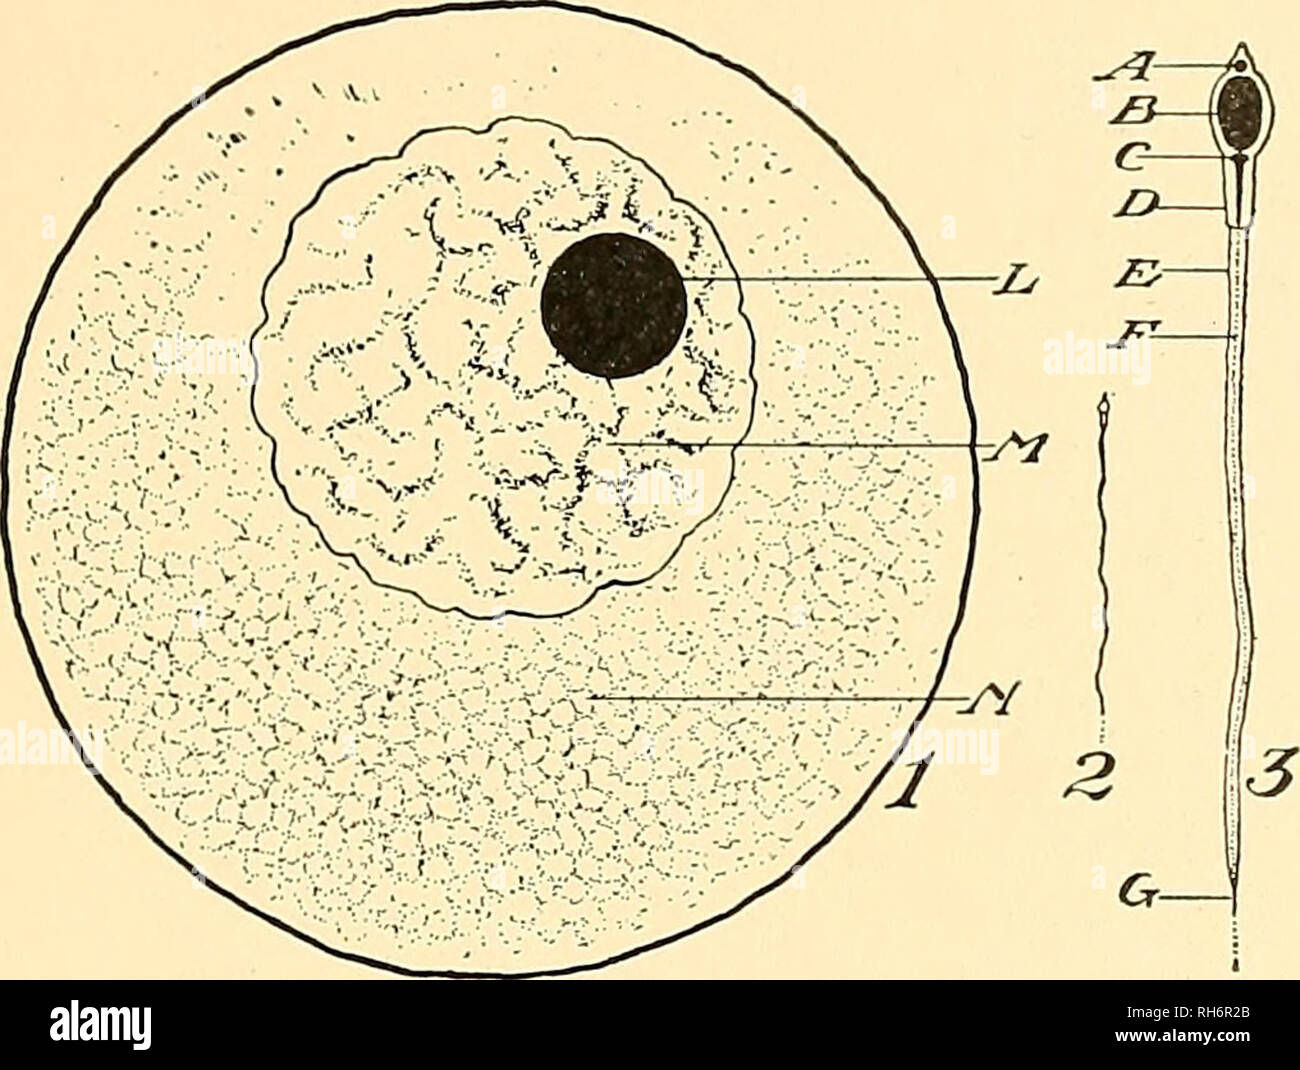 . Breeding of farm animals. Livestock. REPRODUCTIVE ORGANS AND GERM CELLS 17 is very minute, many thousand times less than the bulk of the latter. The sperm cell resembles a minute, elon- gated tadpole, swimming very actively about by the vibrations of a long slender tail. This locomotion is. Fig. 6—Diagram of the Germ Cells 1. Egg cell. 2. Sperm cell size to compare with egg cell. 3. Sperm cell enlarged to show parts. A. Apical body. B. Nucleus. C. End knob. D. Middle piece. E. Envelope of tail. F. Tail piece. G. End piece. L. Nucleolus or germinal spot. M. Nucleus or germinal vesicle contain Stock Photo